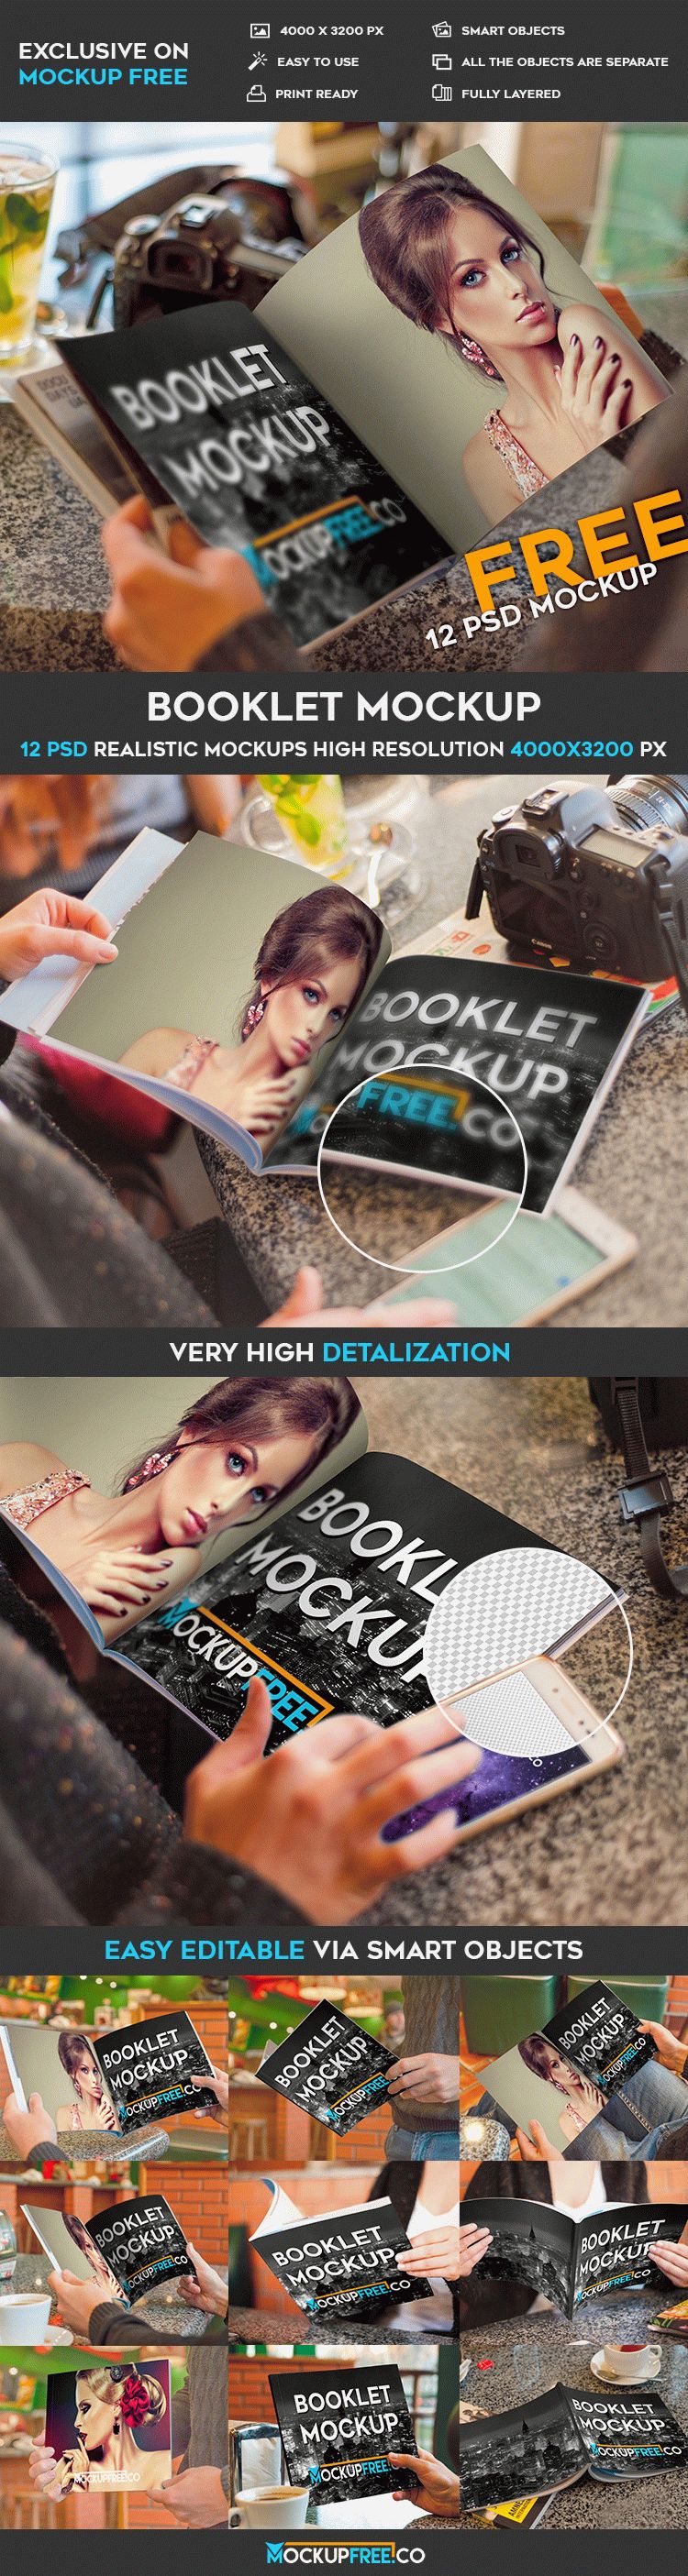 Booklet – 12 Free PSD Mockups | Free PSD Templates